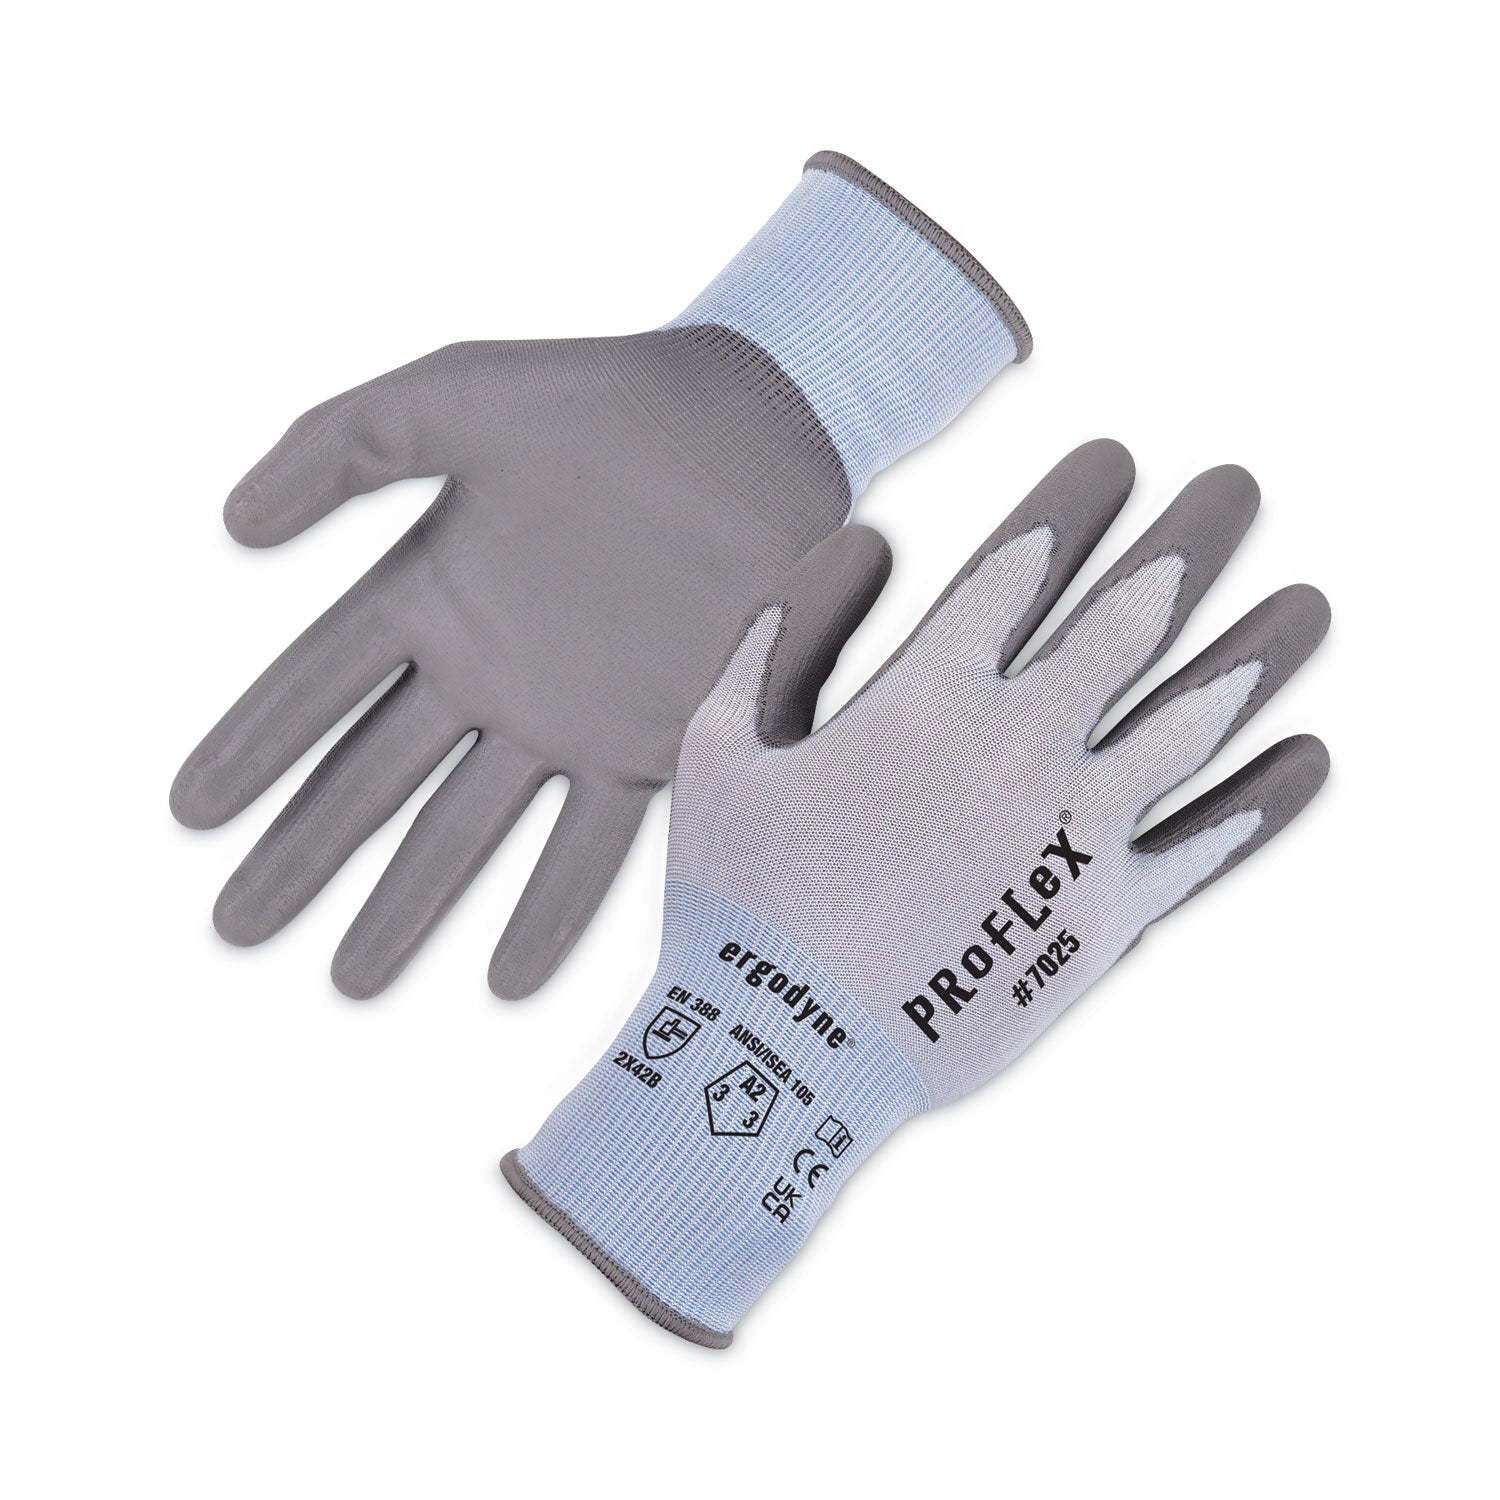 proflex-7025-ansi-a2-pu-coated-cr-gloves-blue-medium-12-pairs-pack-ships-in-1-3-business-days_ego10423 - 1